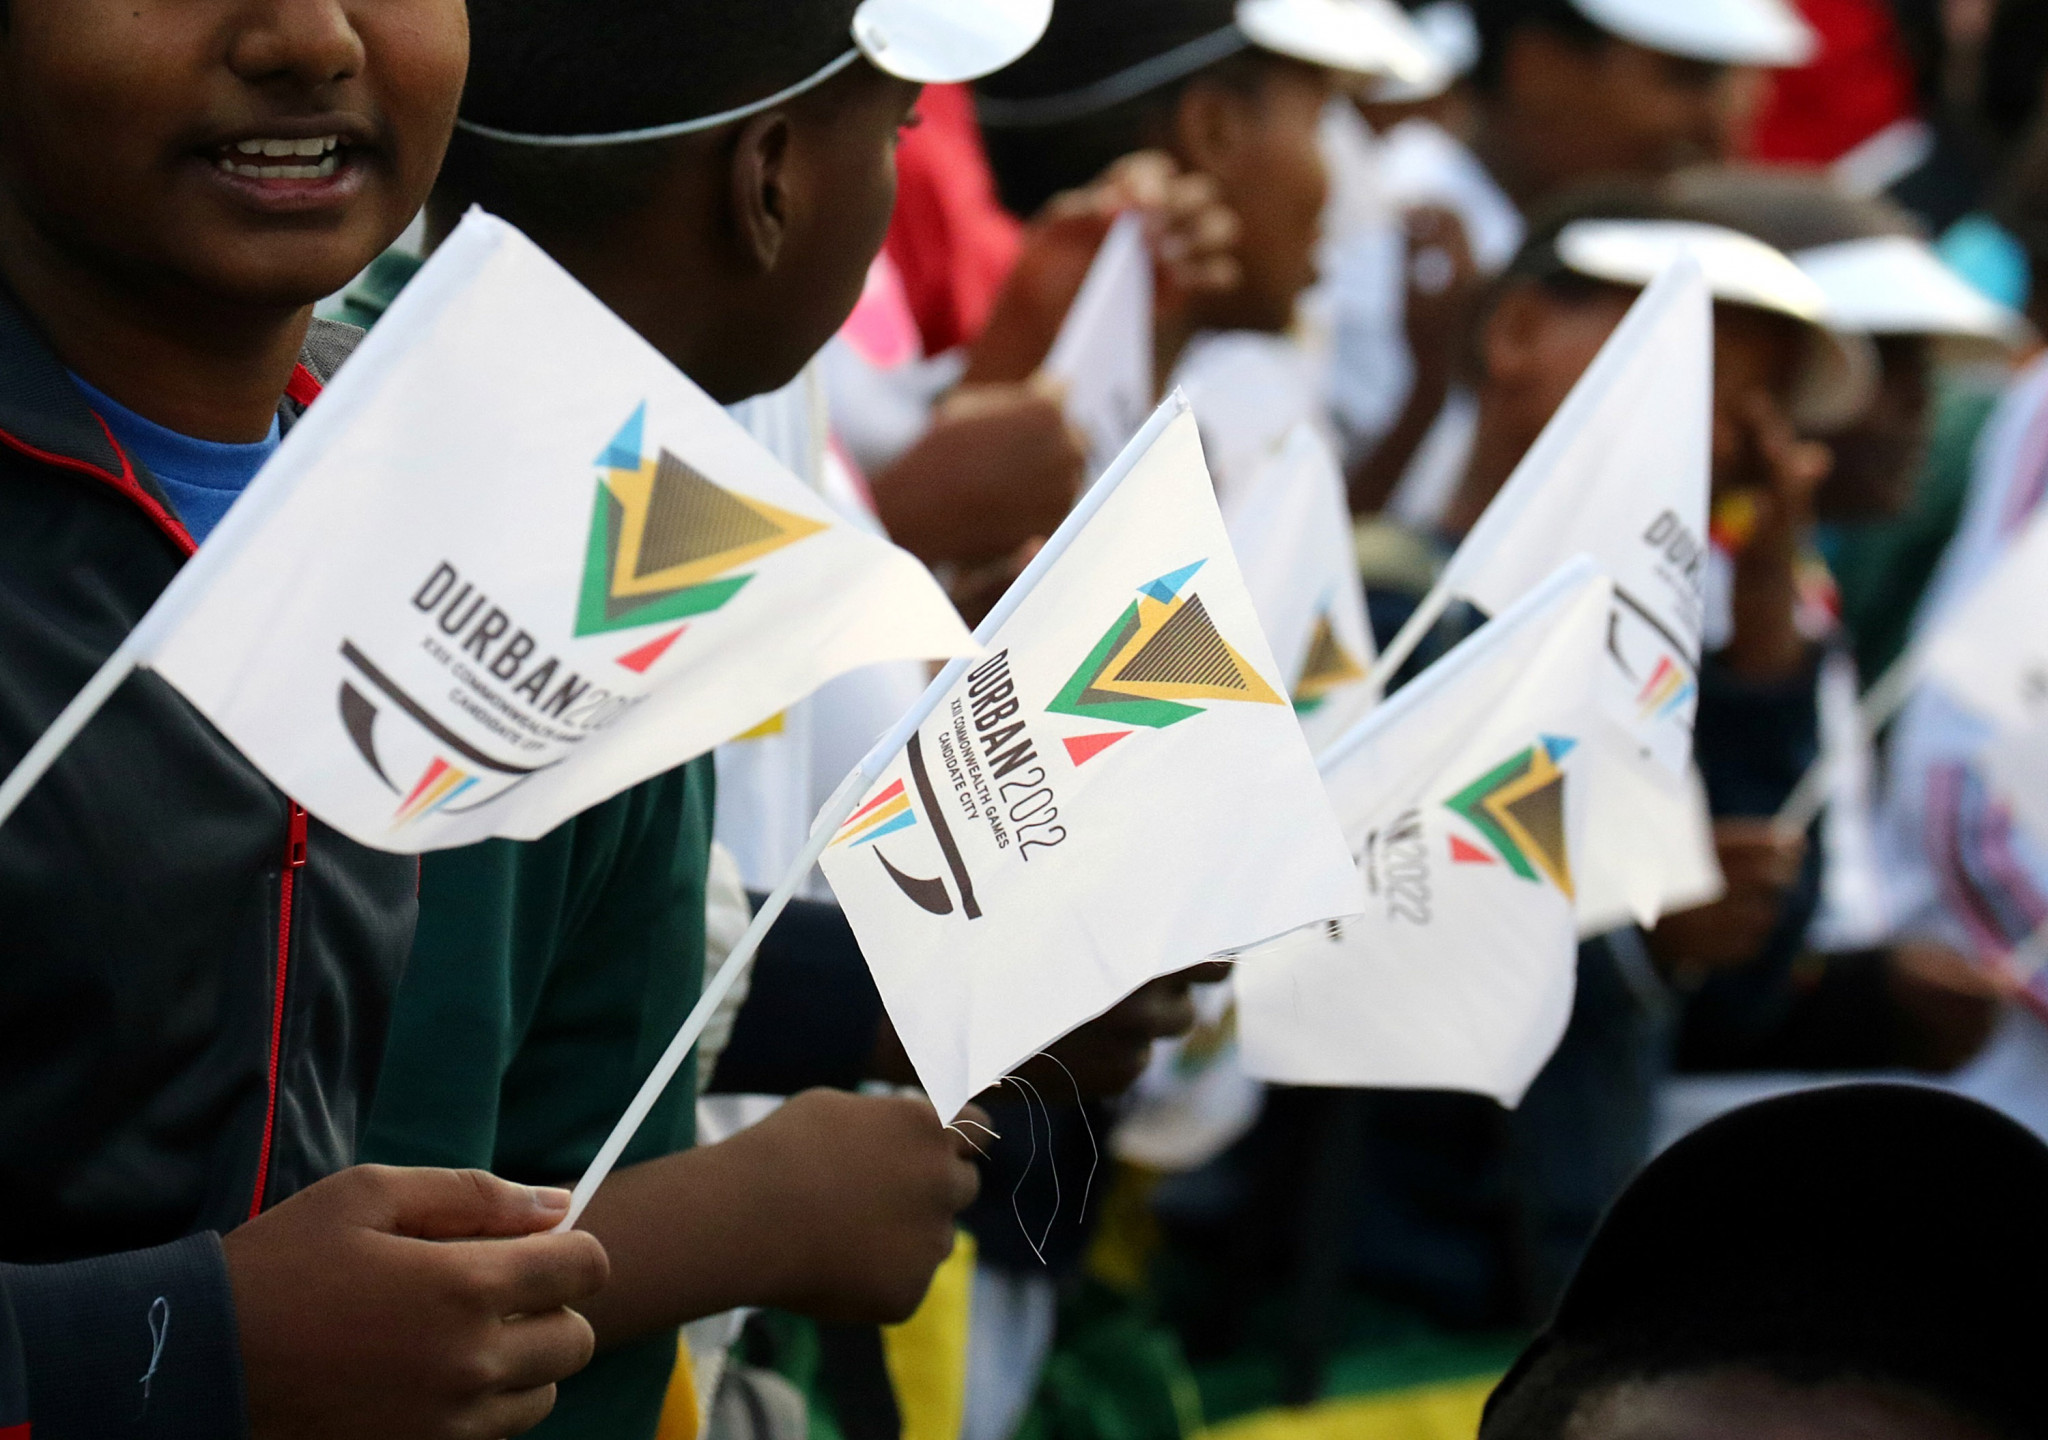 Durban's ill-fated attempt to host the Commonwealth Games damaged South Africa's credibility ©Getty Images